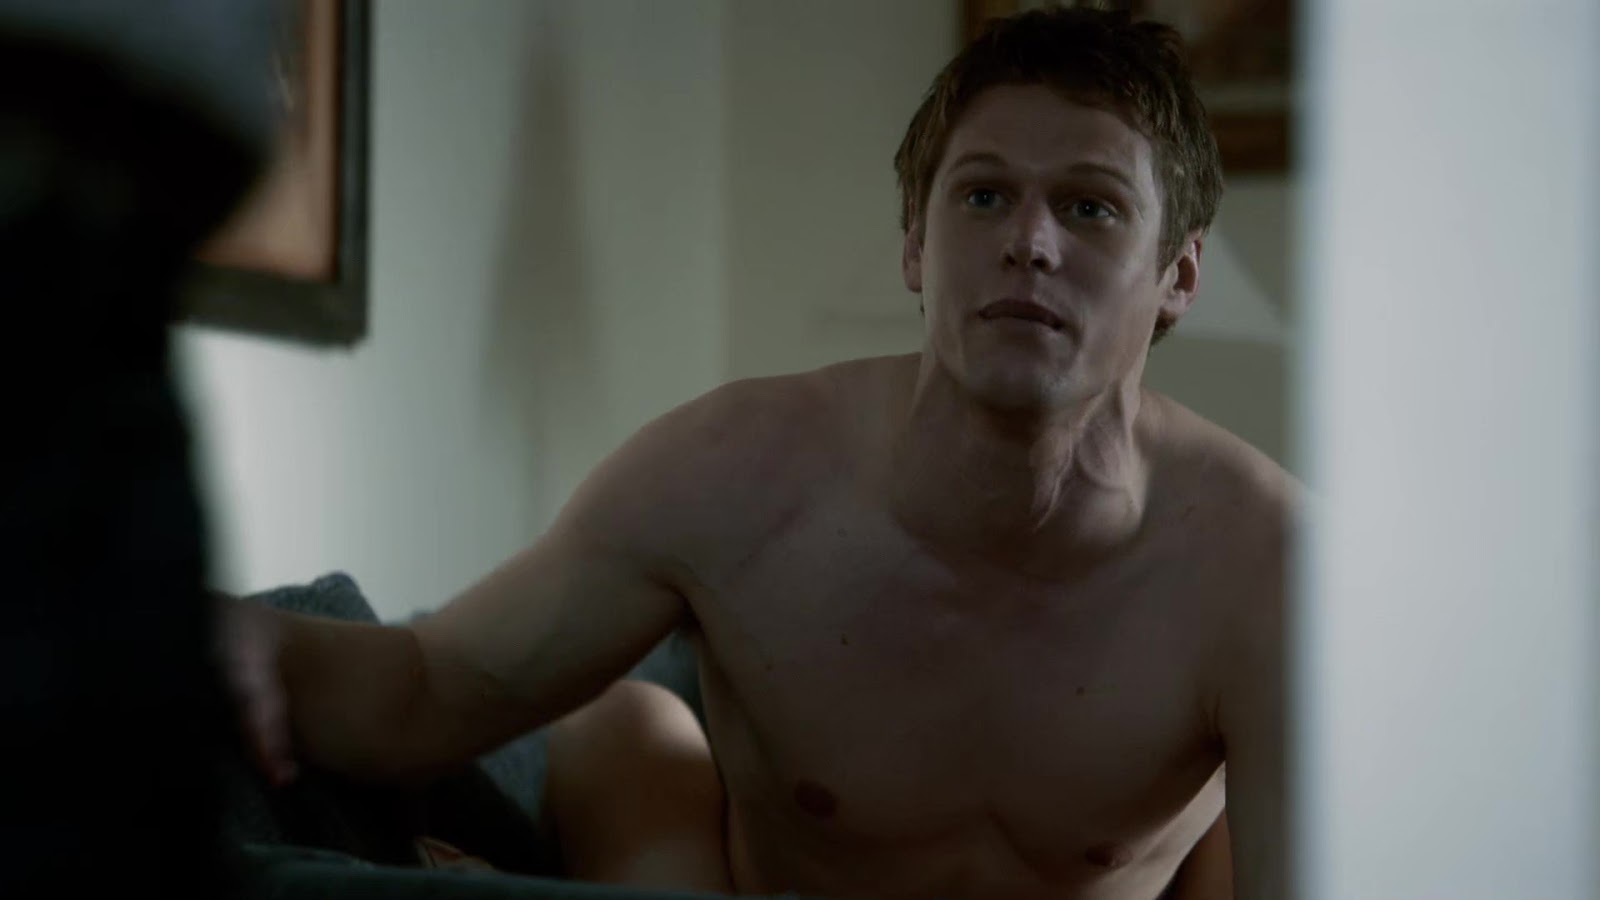 Zach Roerig shirtless in The Vampire Diaries 1-15 "A Few Good Men"...